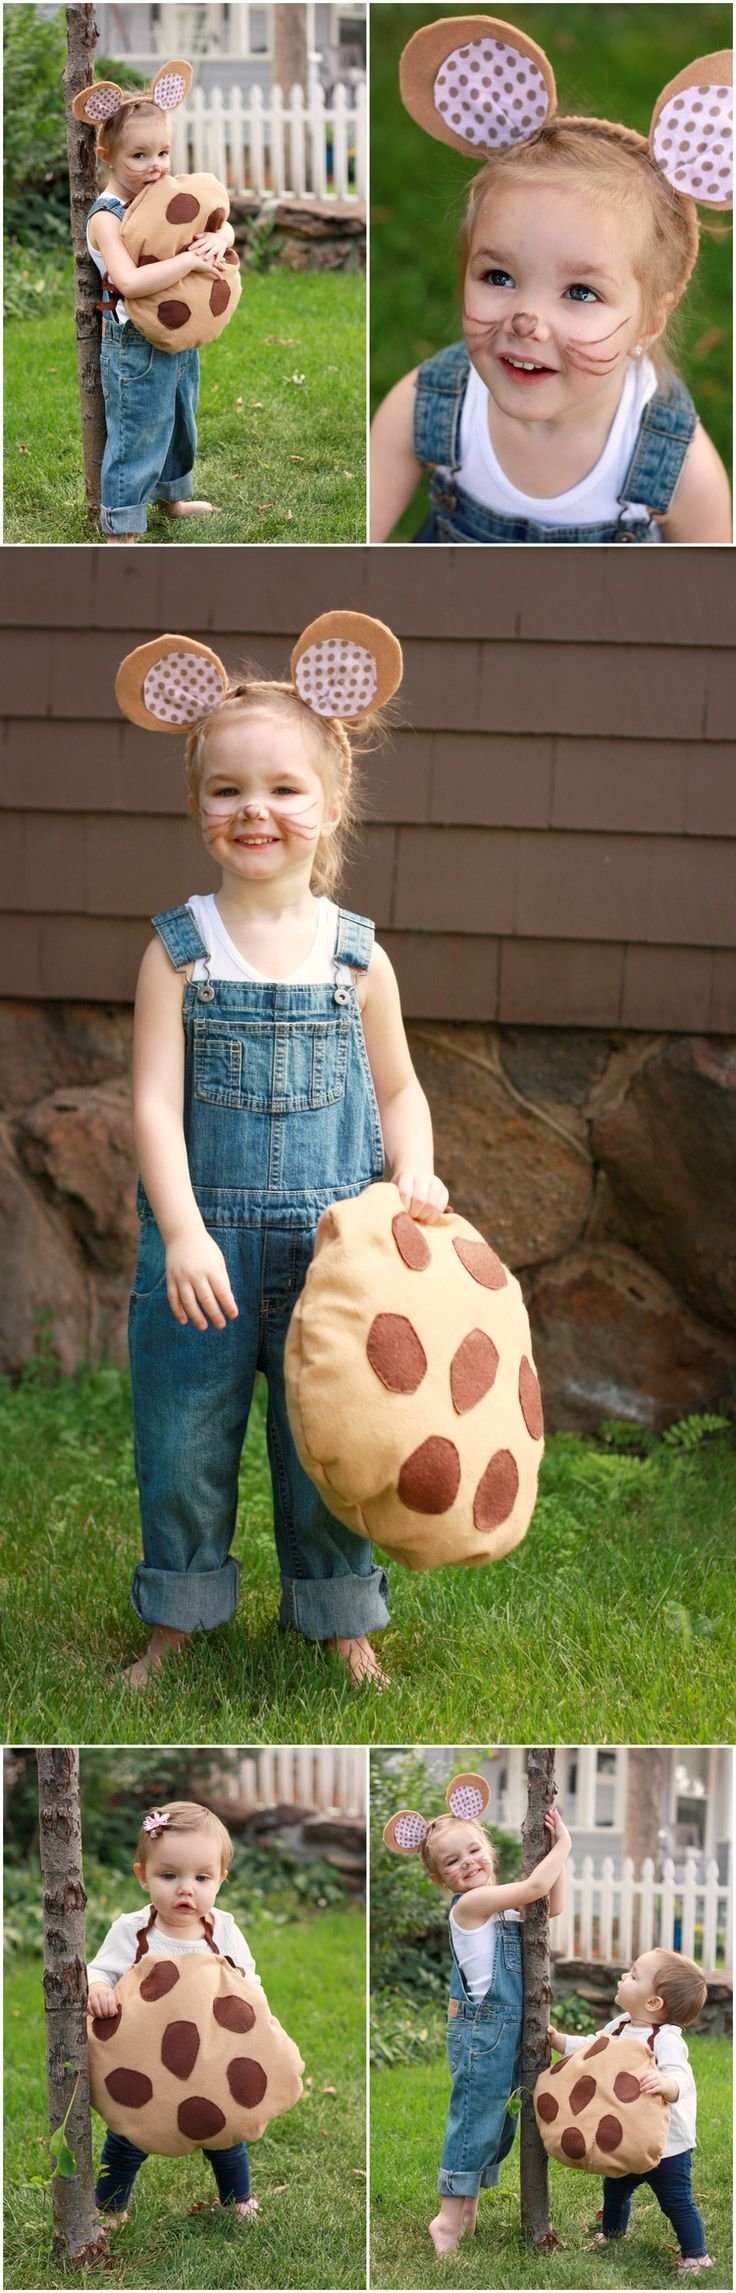 10 Most Recommended Homemade Costume Ideas For Kids 95 best handmade costumes images on pinterest costumes carnivals 2022